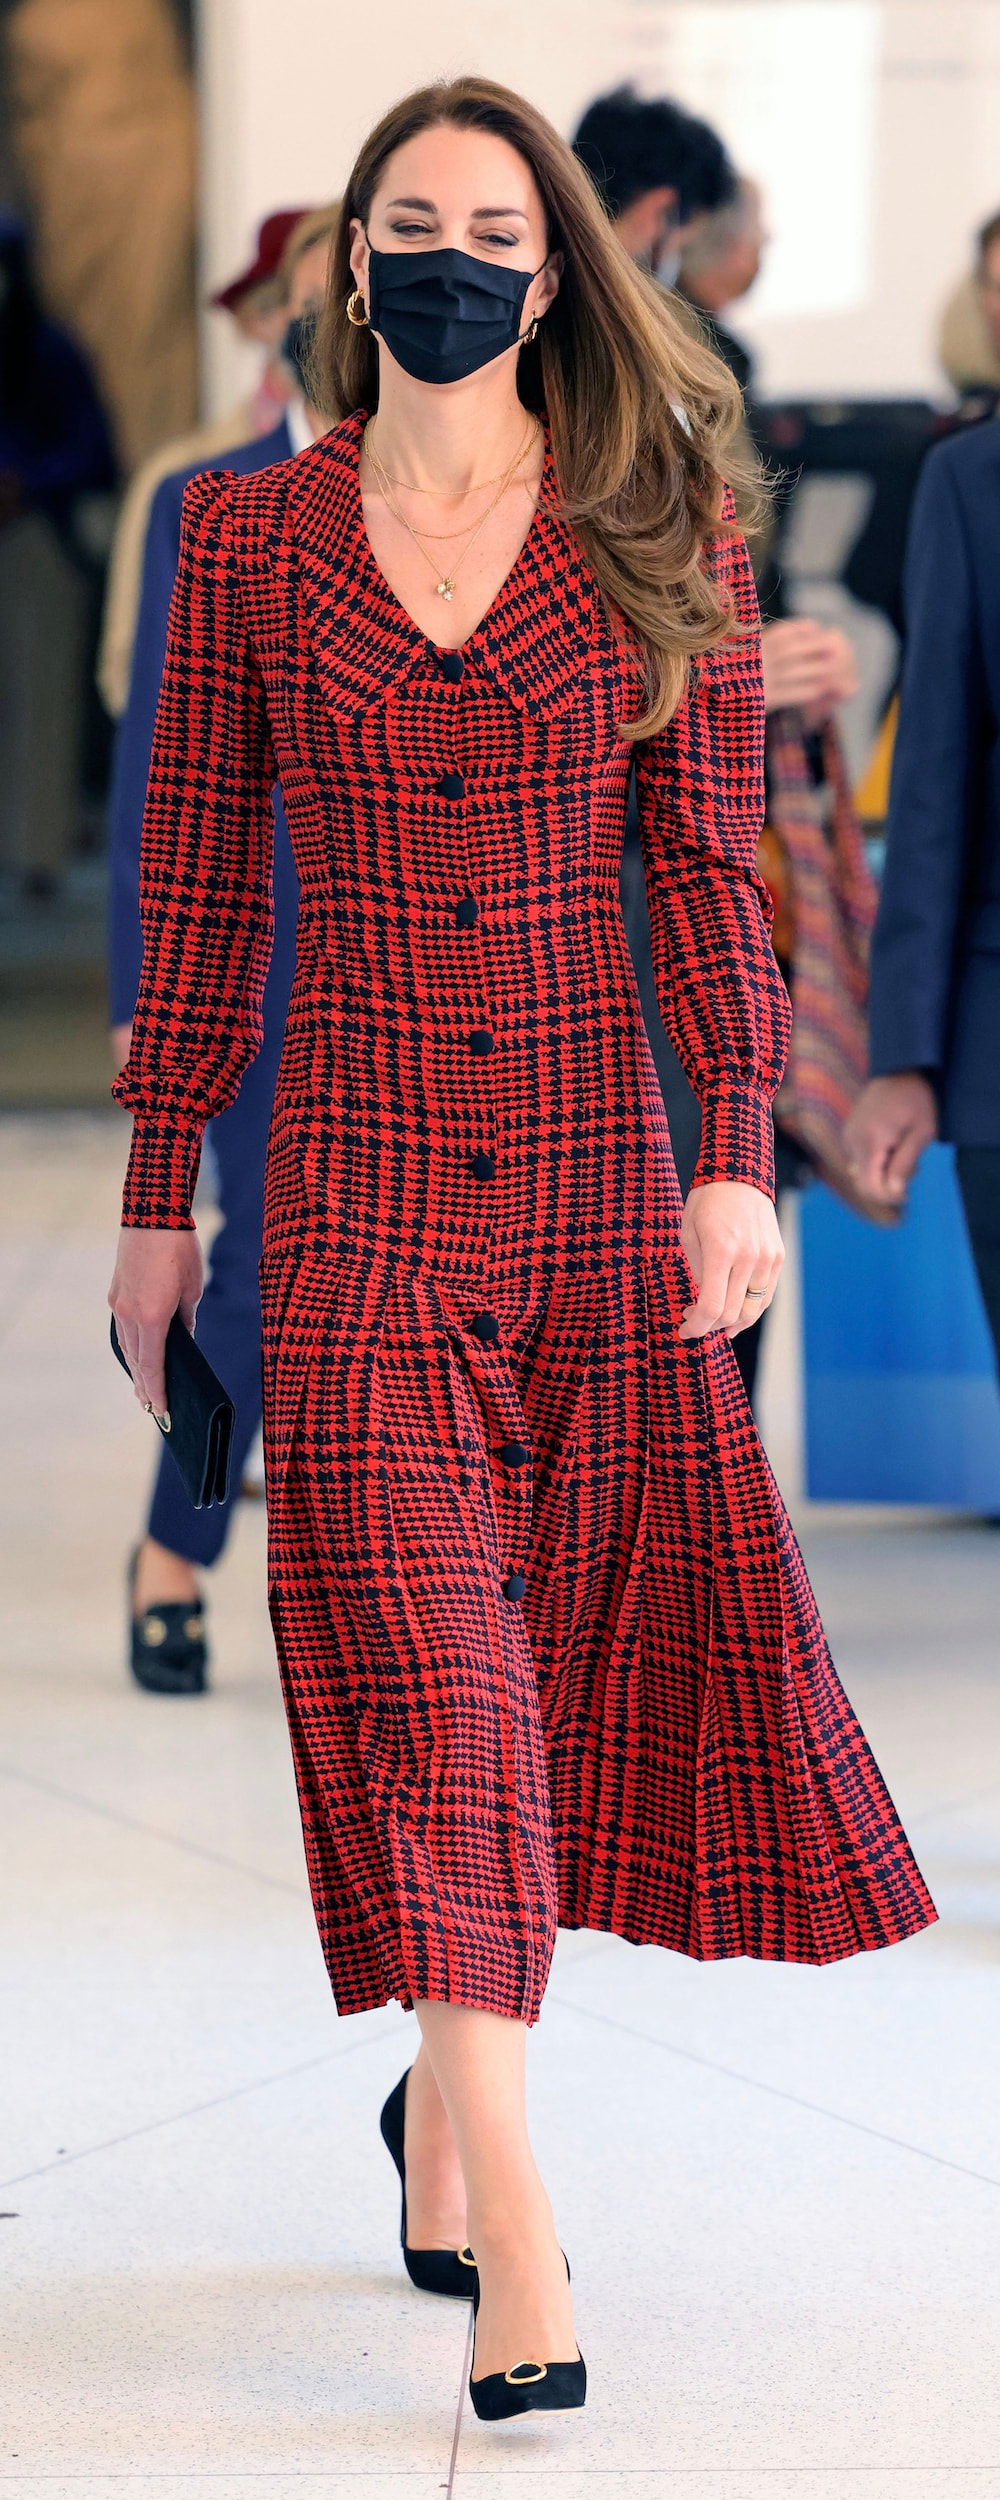 Alessandra Rich Red & Black Houndstooth Midi Dress as seen on Kate Middleton, The Duchess of Cambridge.